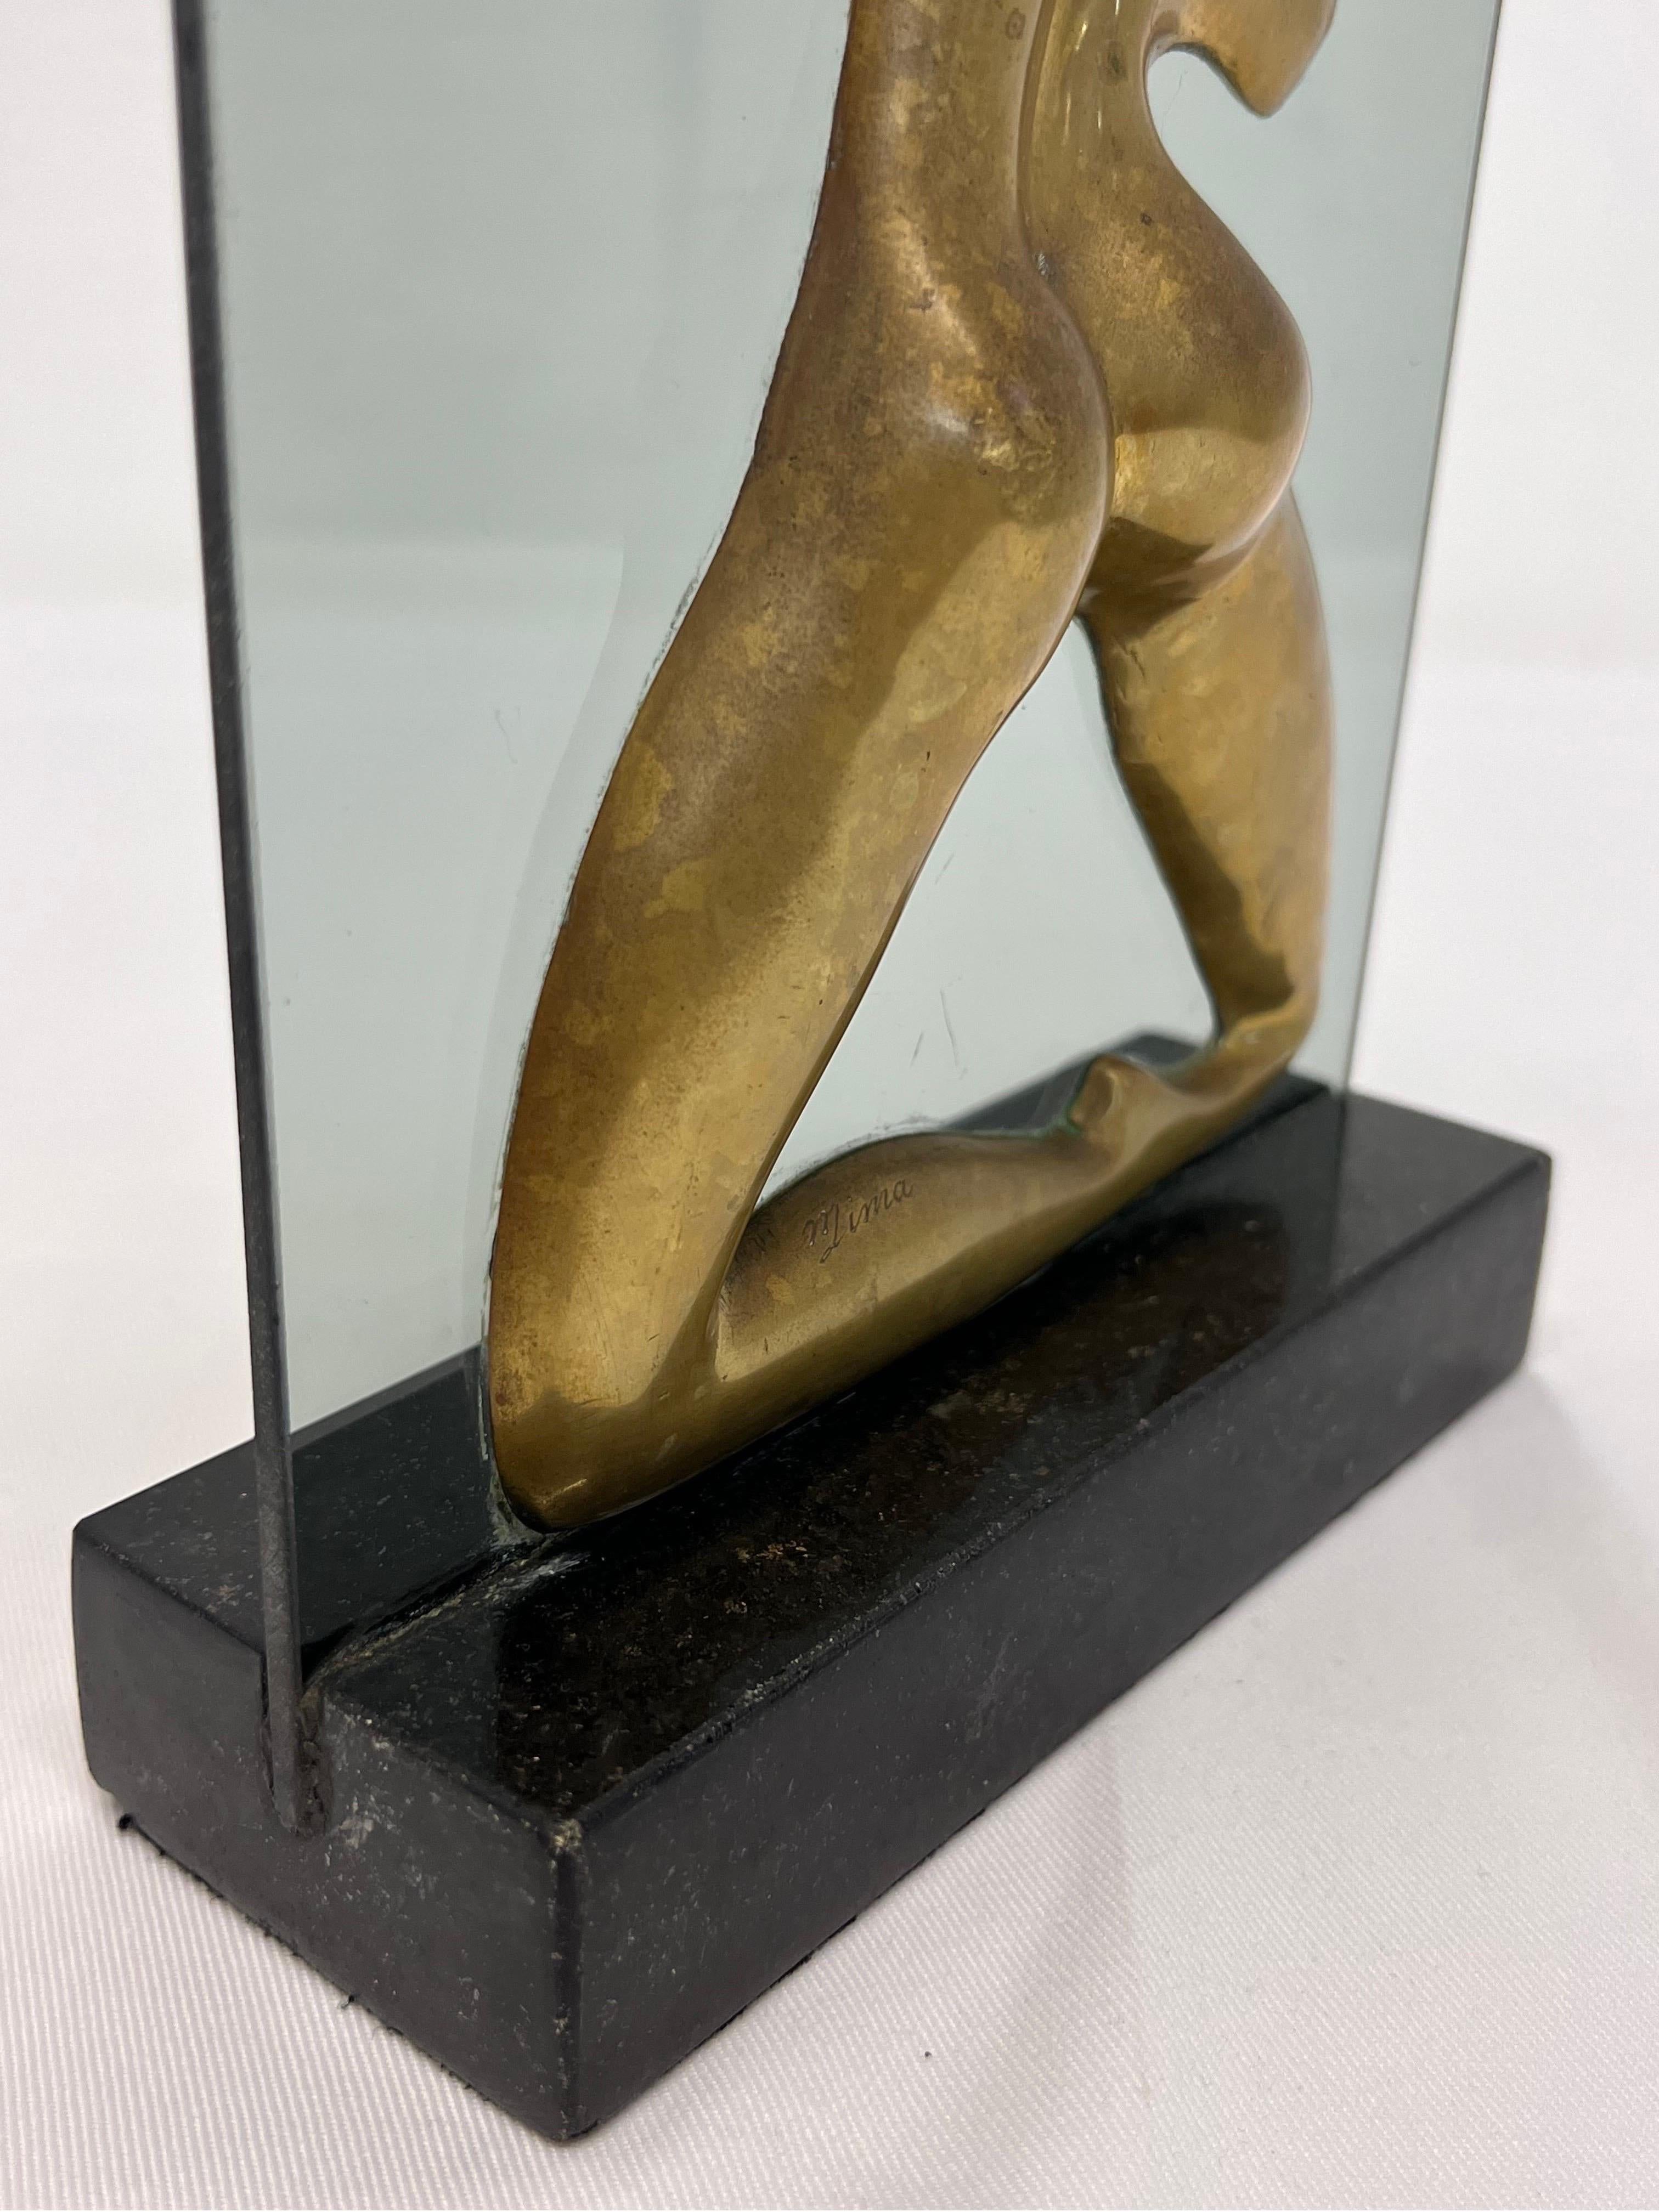 Brazilian Mid-Century Modern Bronze Sculpture on Glass and Granite Base, 1960s For Sale 7